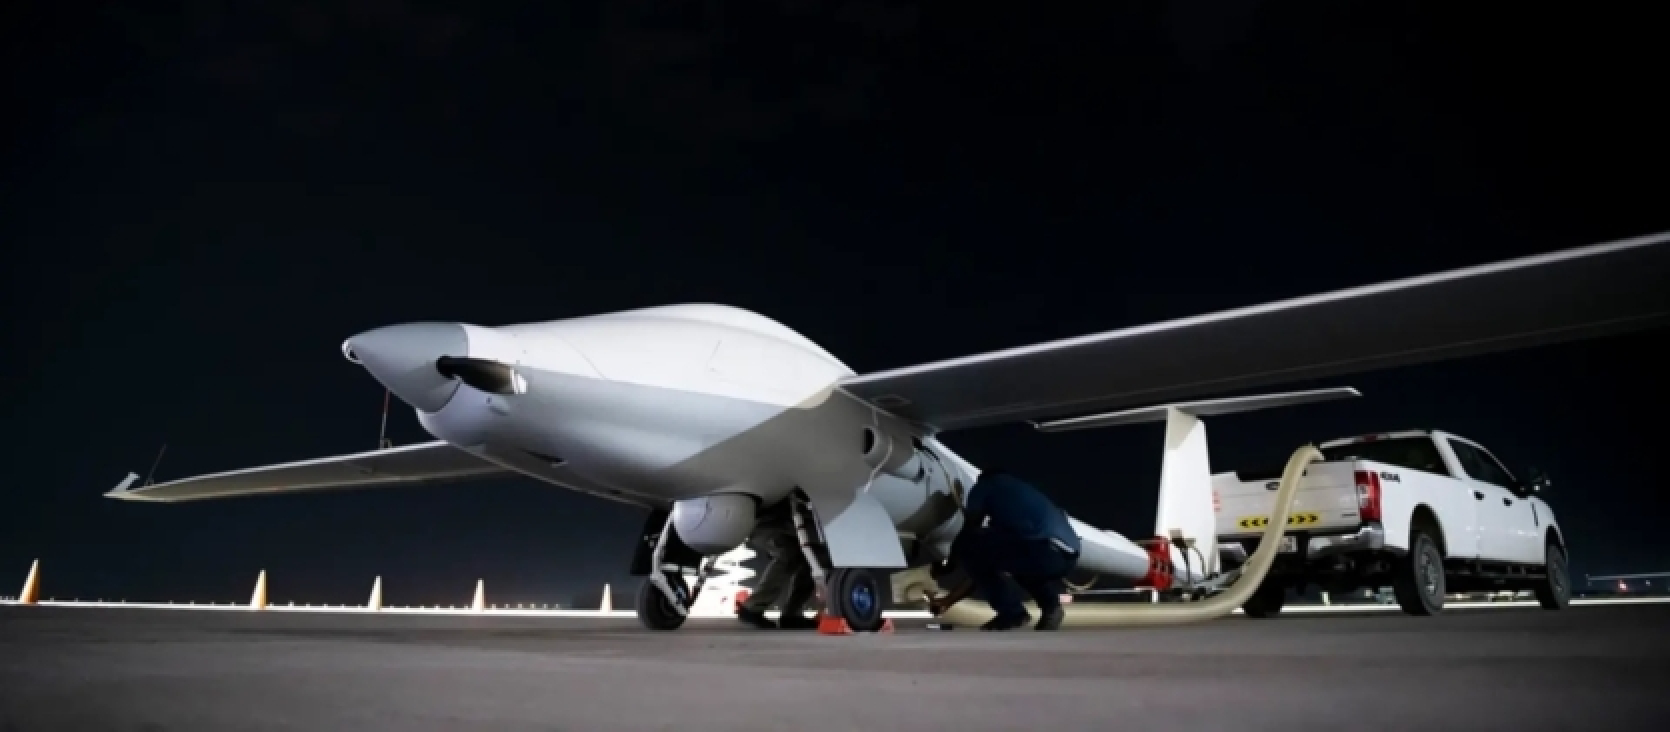 The U.S. Air Force has declassified the ULTRA reconnaissance UAV, a significantly cheaper alternative to the MQ-9 Reaper with an autonomy of 80 hours